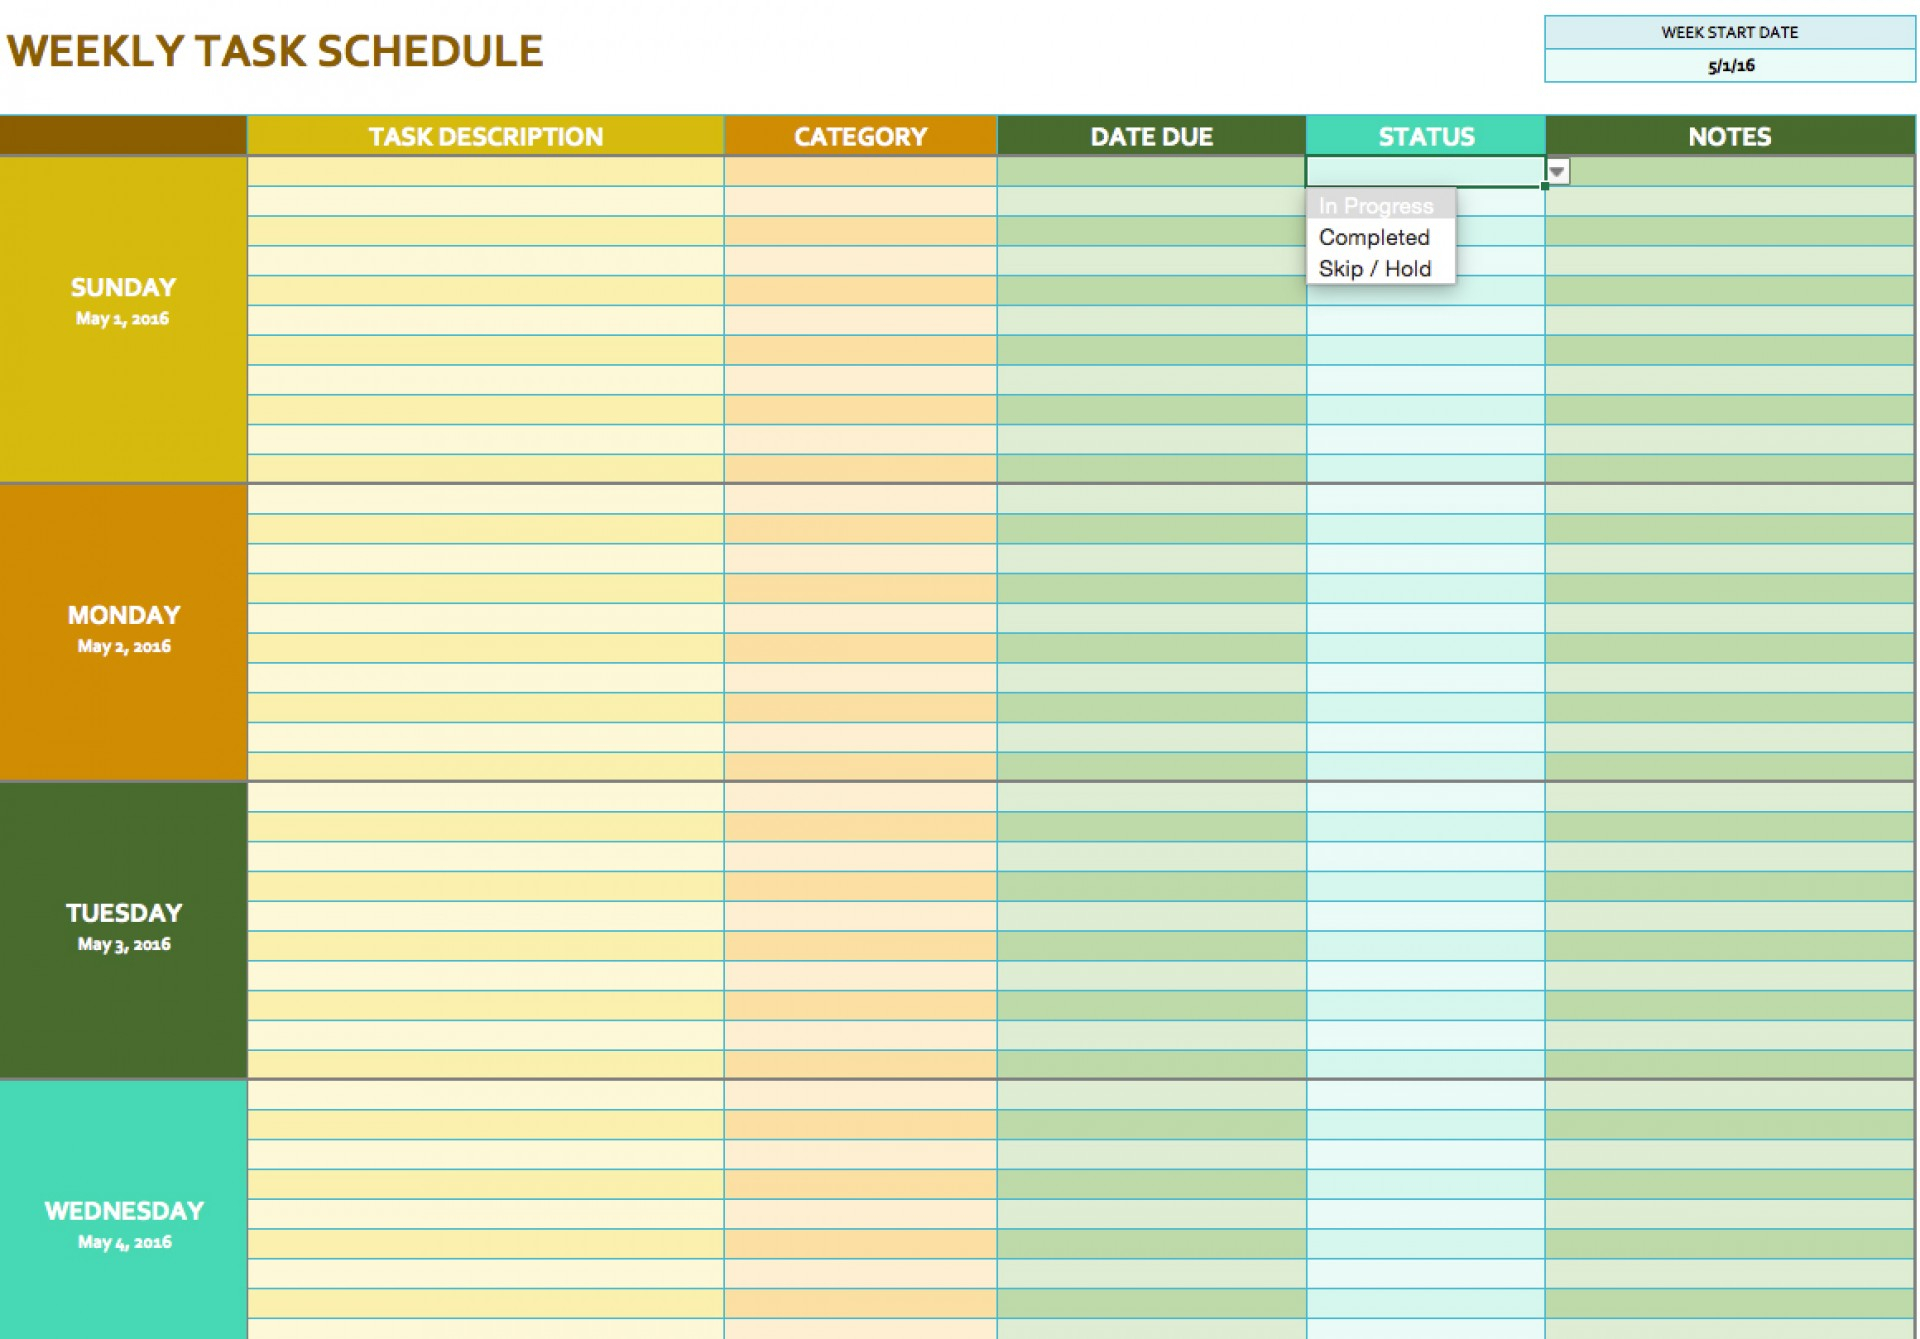 Excel Spreadsheet Task List Template Intended For 015 Weekly Todo List Template Ideas Task Schedule Resume Boat